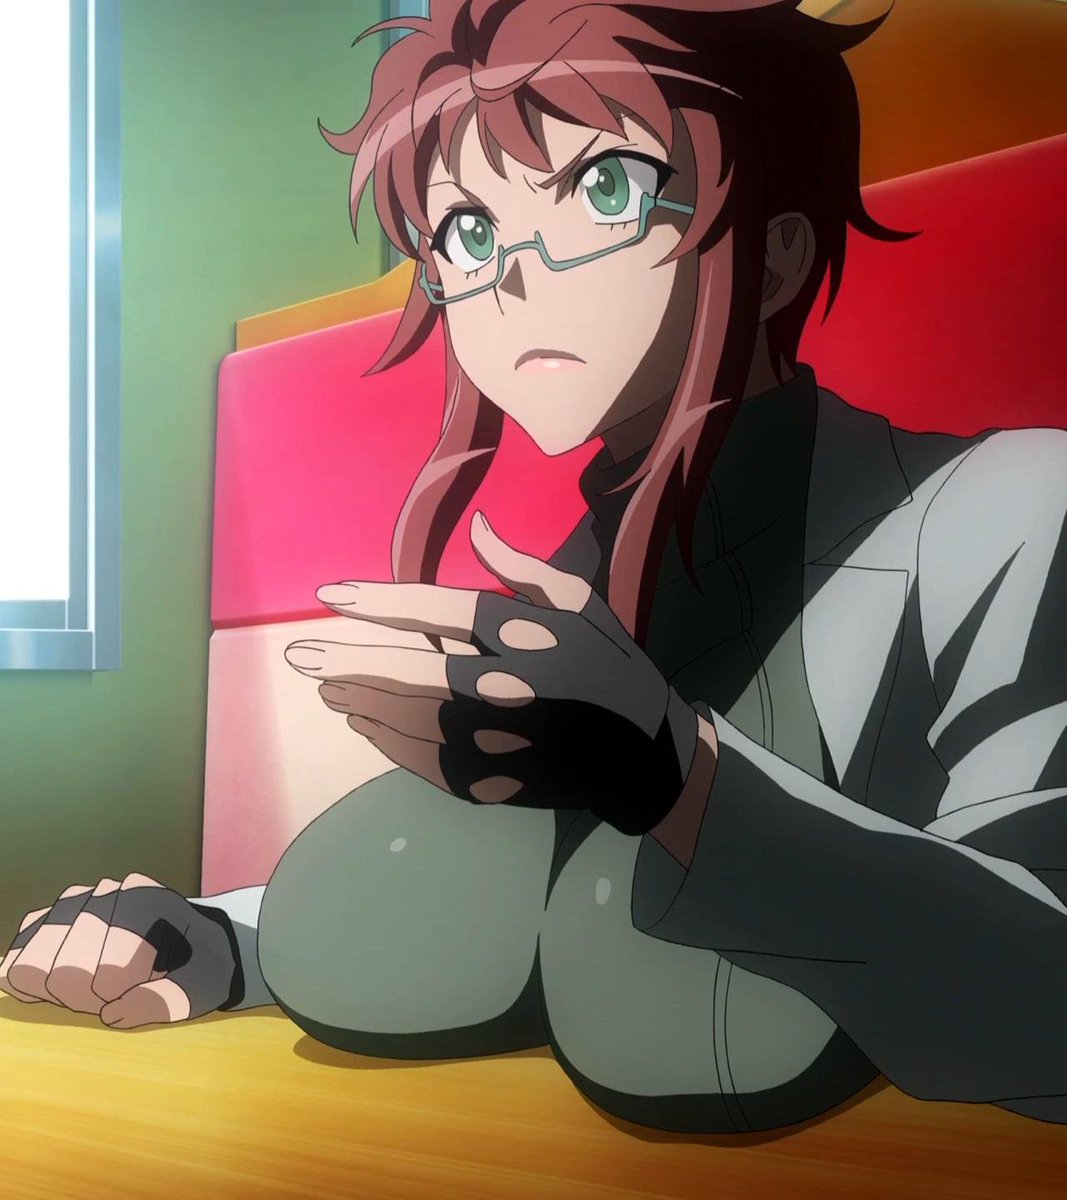 Konomi Suzue is a supporting character in Triage X manga and anime series. She is a new detective in Tobioka Police Force. She has short orange hair, which are on both sides longer, green eyes, a pair of glasses and an enormous pair of breasts.